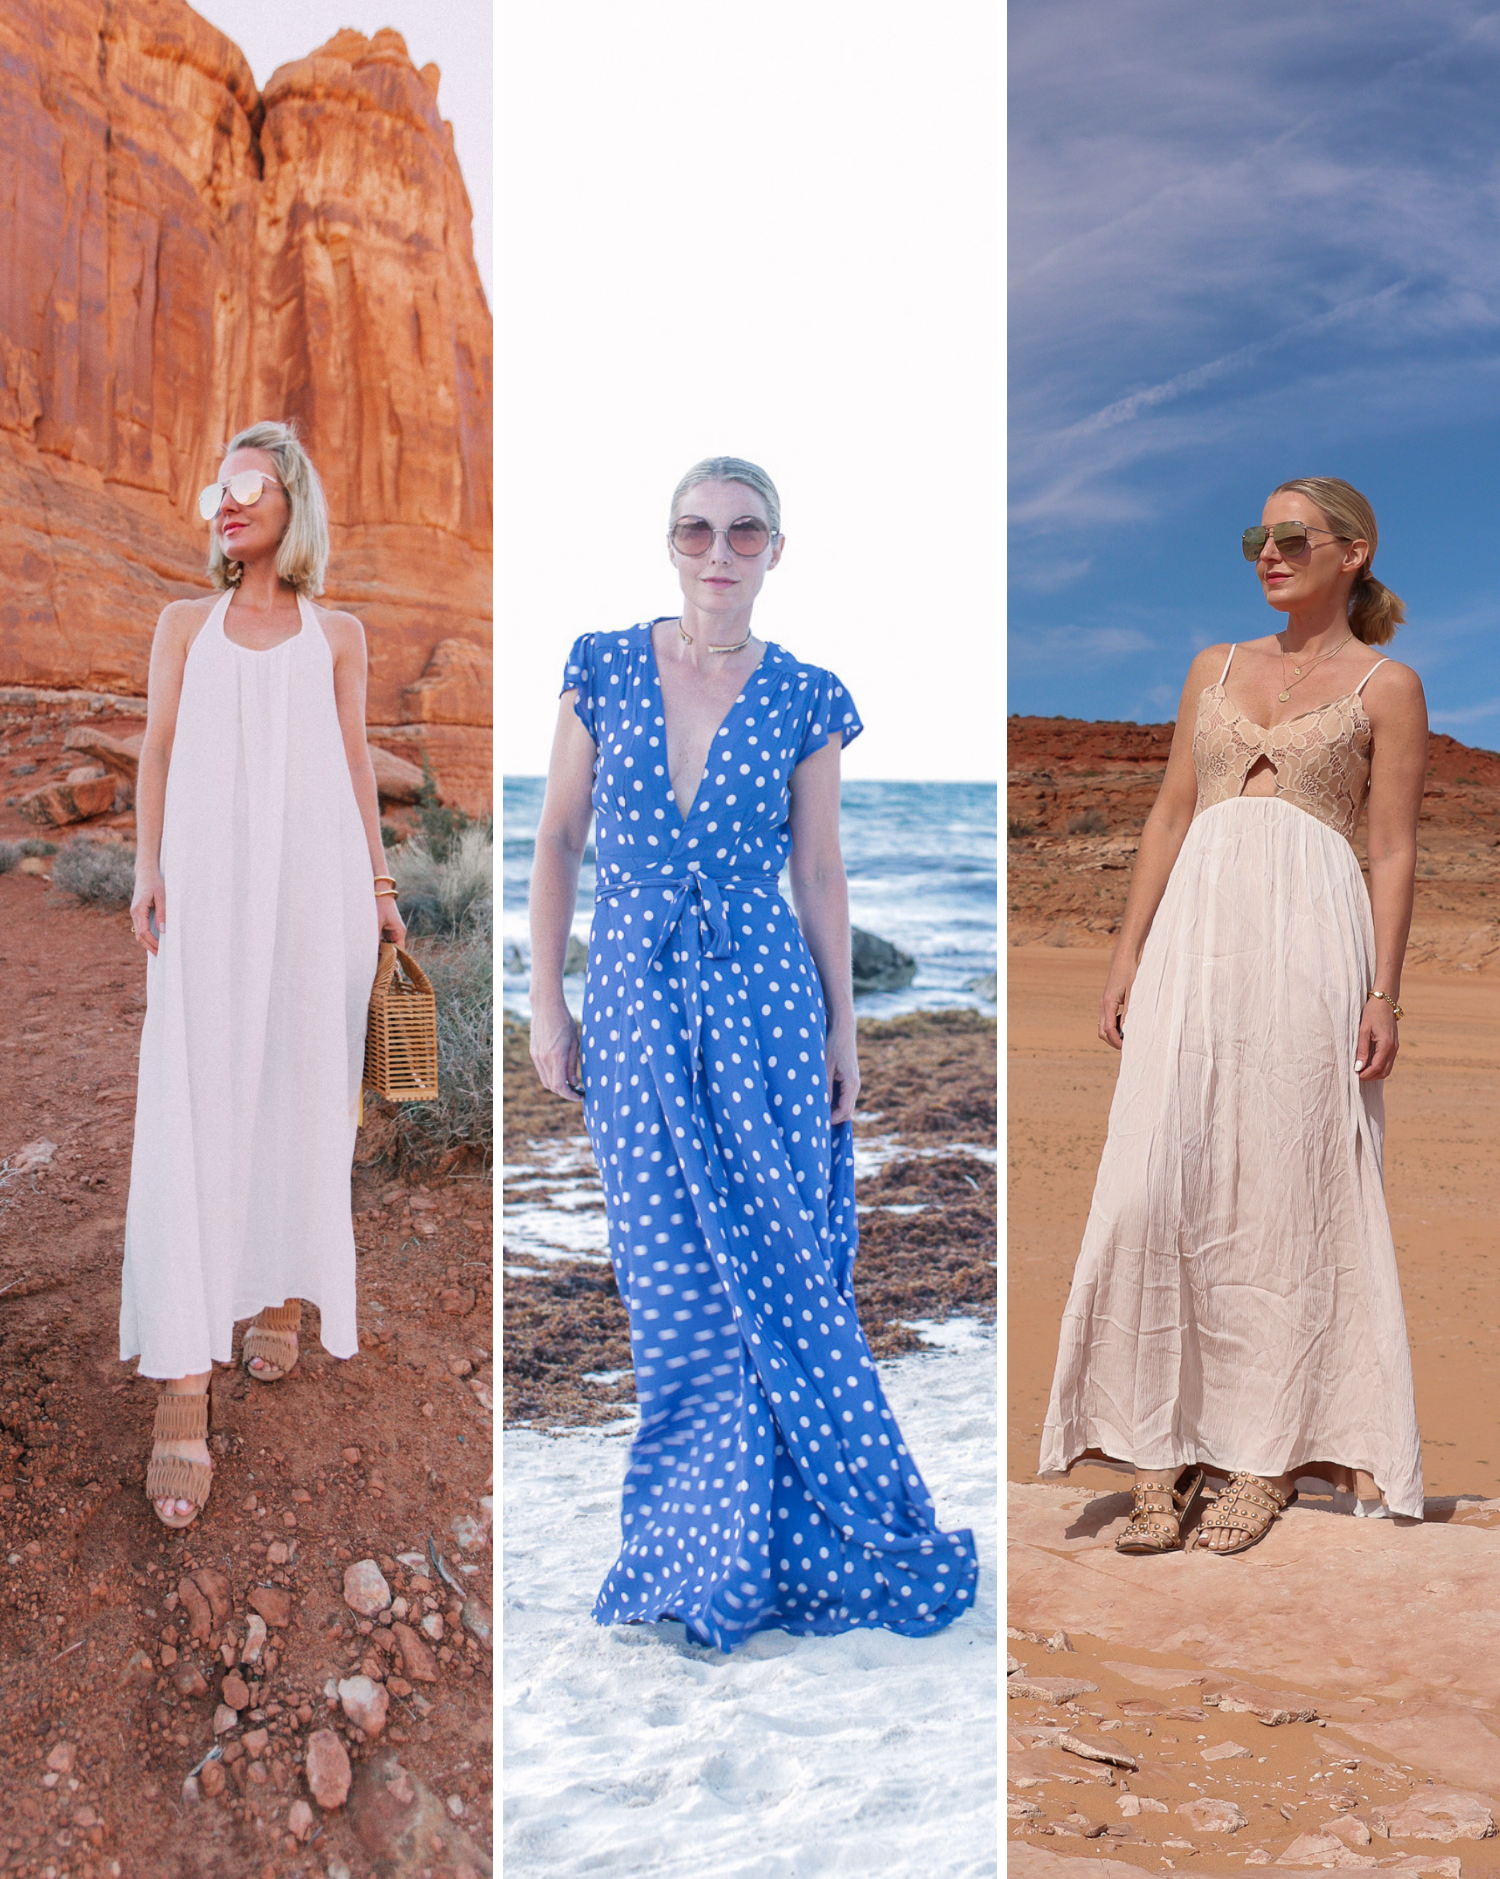 Fashion blogger busbee style wearing maxi dresses by 9seed and Tularosa 